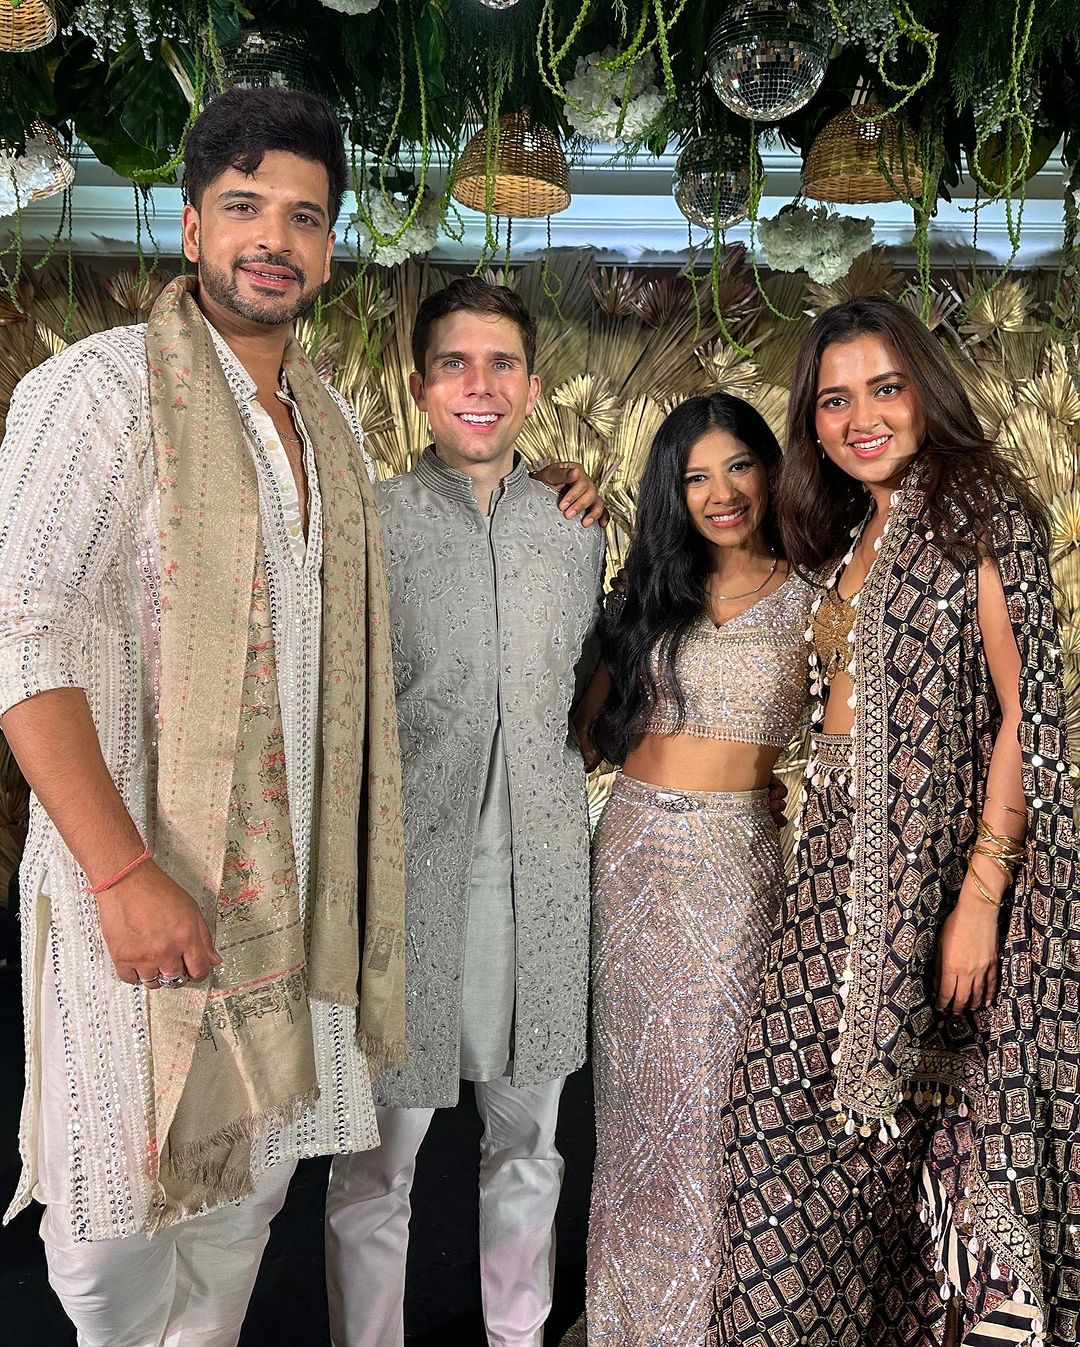 Adorable Couple Tejasswi And Karan Kundrra Stun With Their Outfits On Their Friend’s Wedding. The Duo Treated Fans With Their Recent Glimpse 